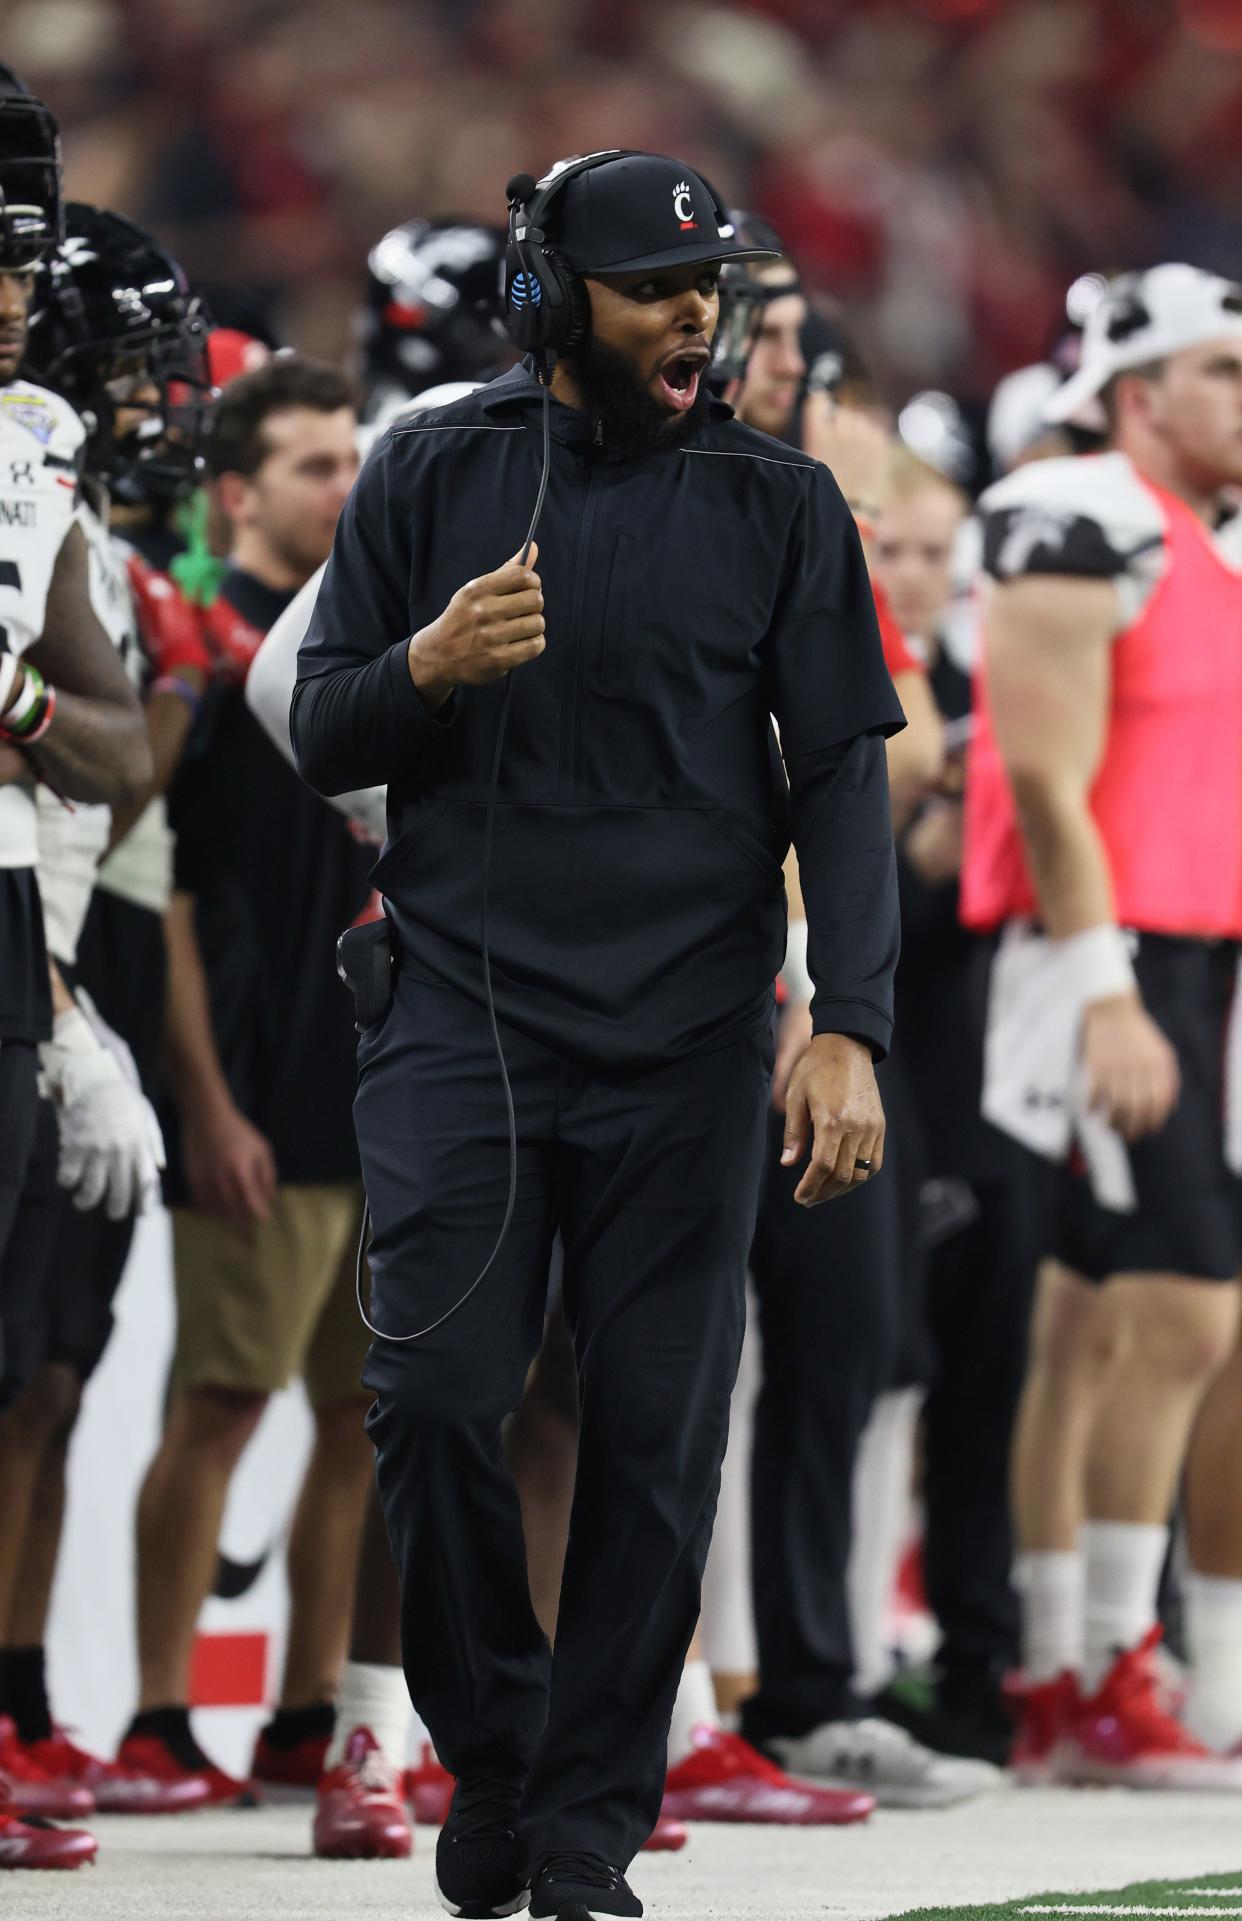 Greg Scruggs, who had been a member of Luke Fickell's staff at Cincinnati, was hired as his defensive line coach at Wisconsin.